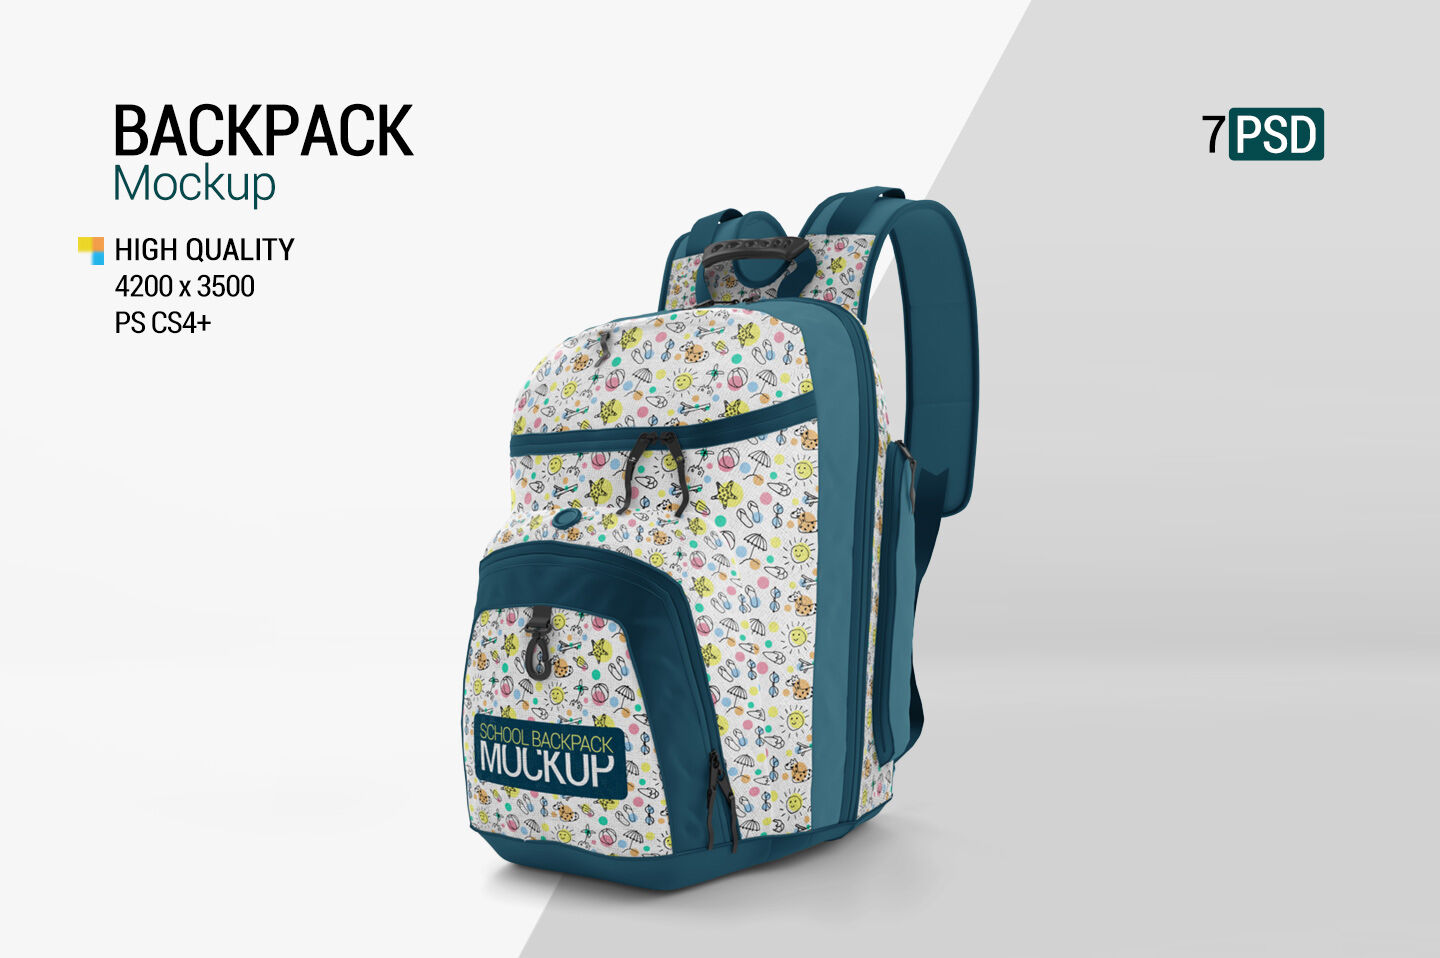 Backpack Mockup By Pixelica21 | TheHungryJPEG.com